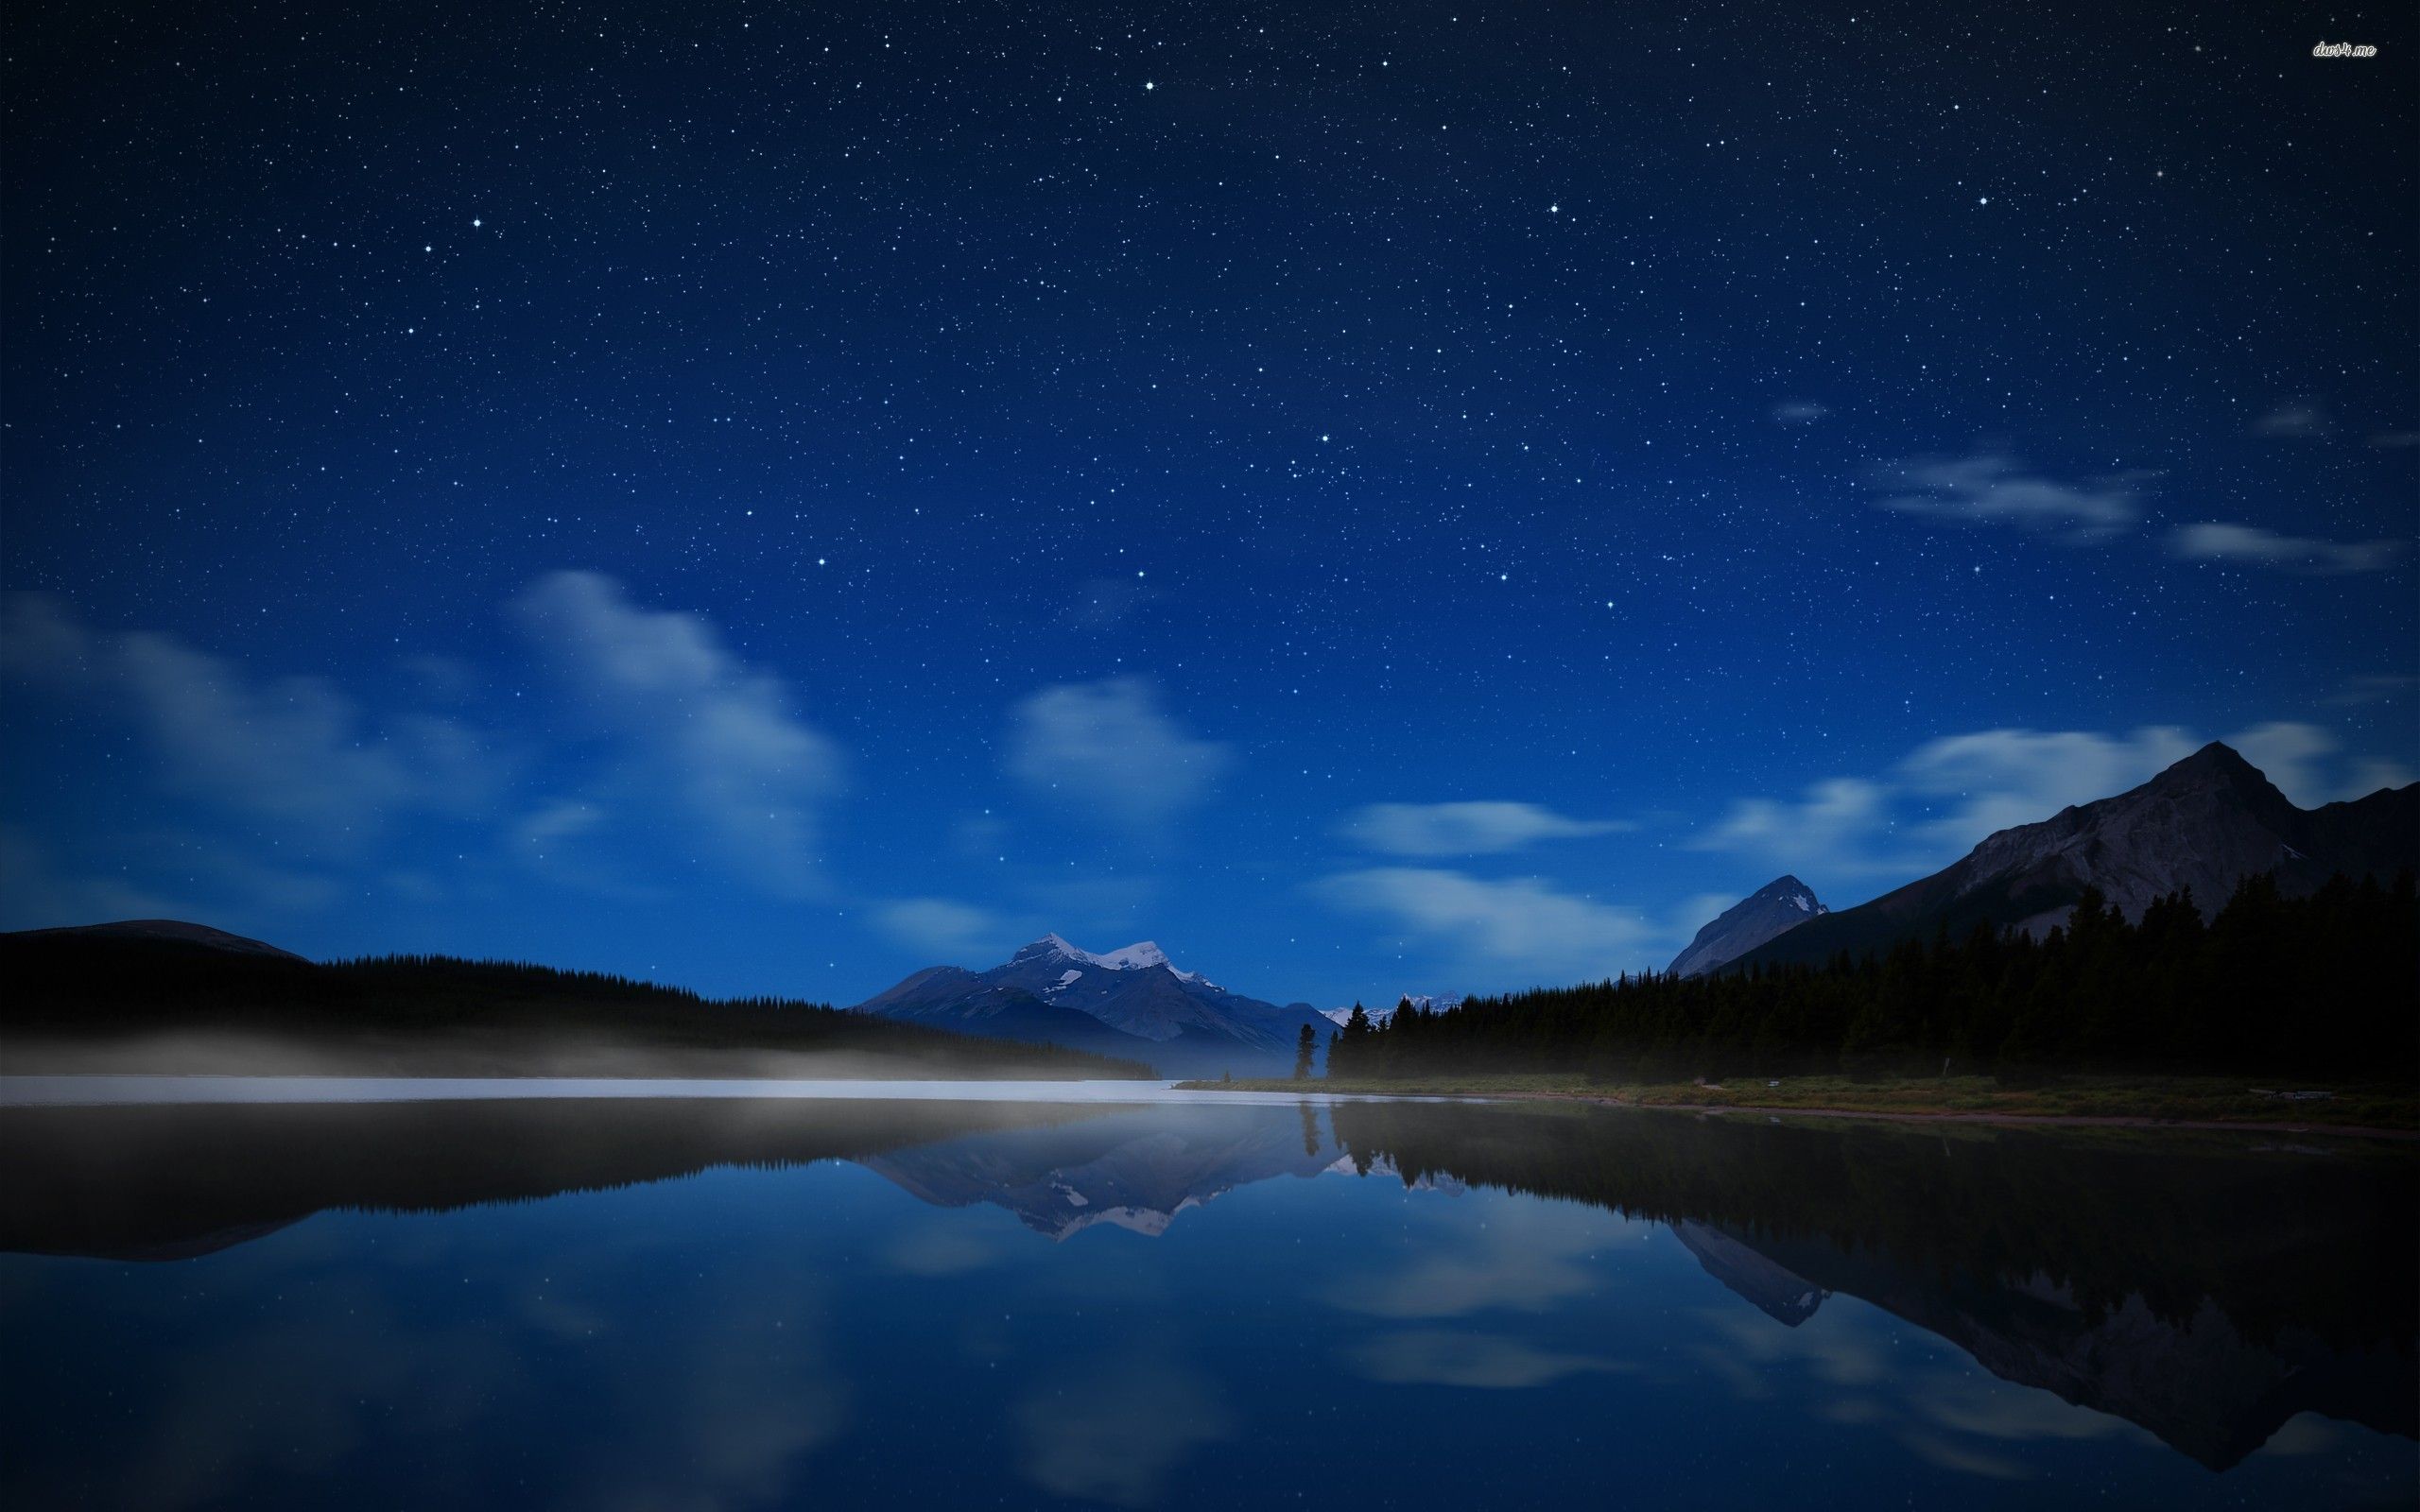 Star filled night sky wallpaper - Nature wallpapers - #15772